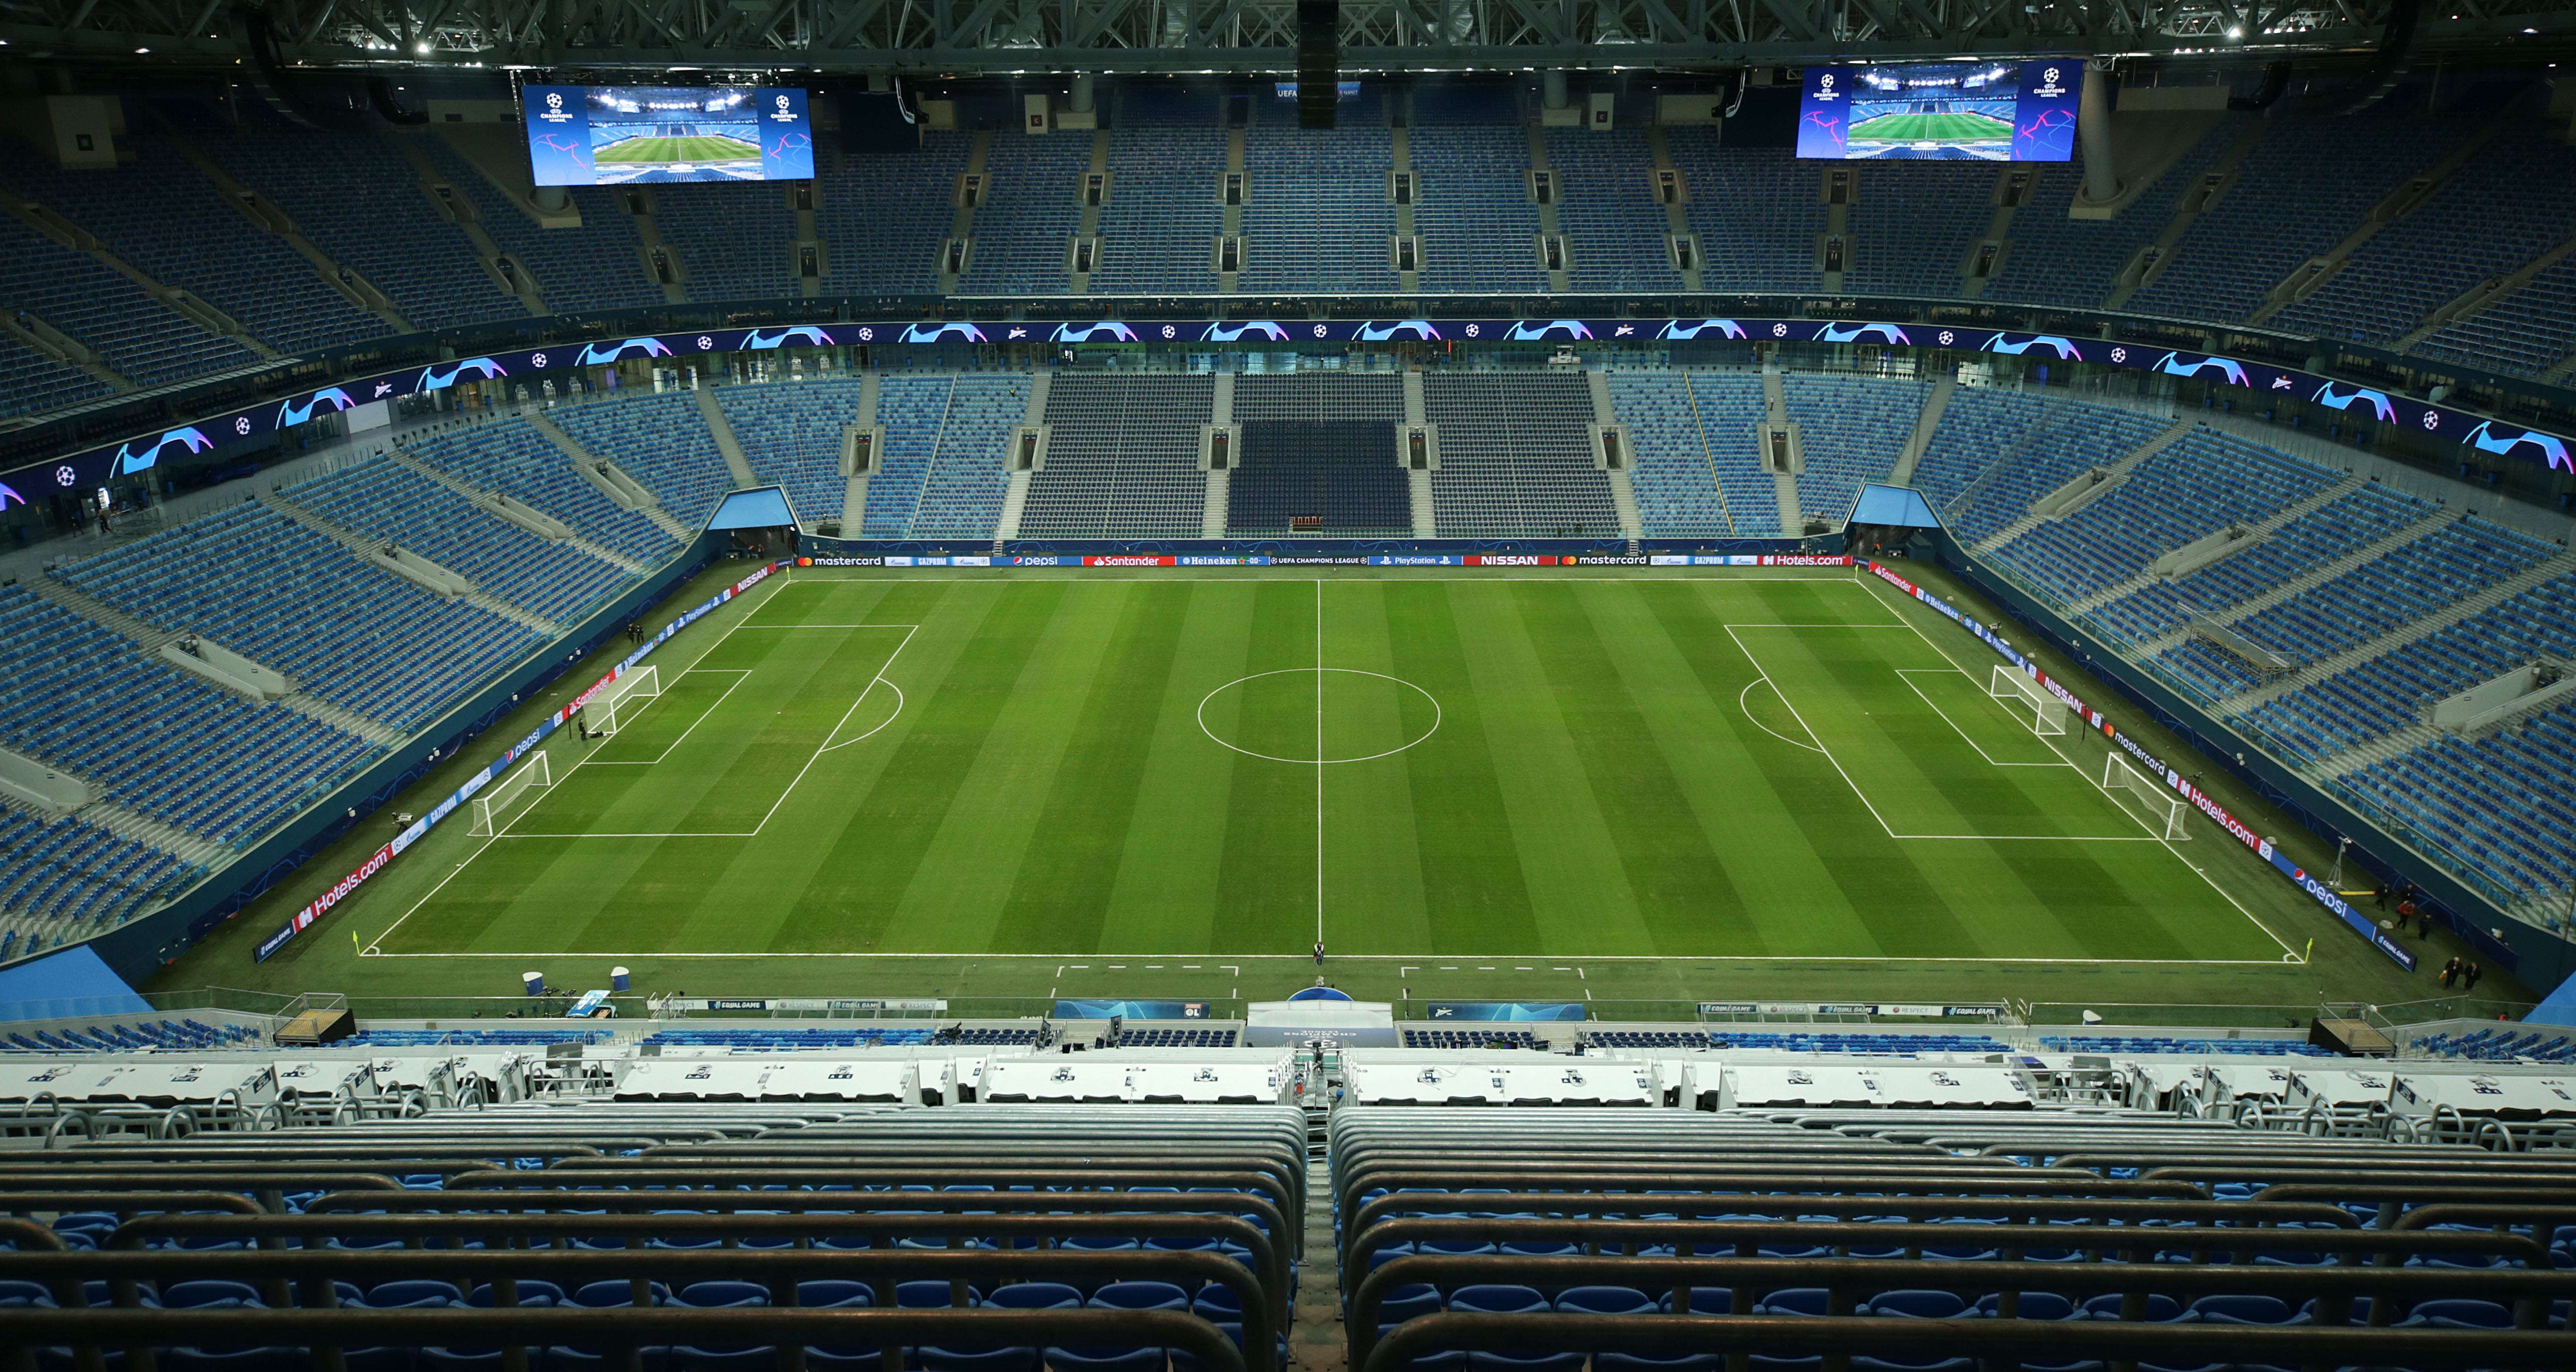 The Gazprom Arena prior to the UEFA Champions League group G match between Zenit St. Petersburg and Olympique Lyon on November 27, 2019 in St. Petersburg, Russia.